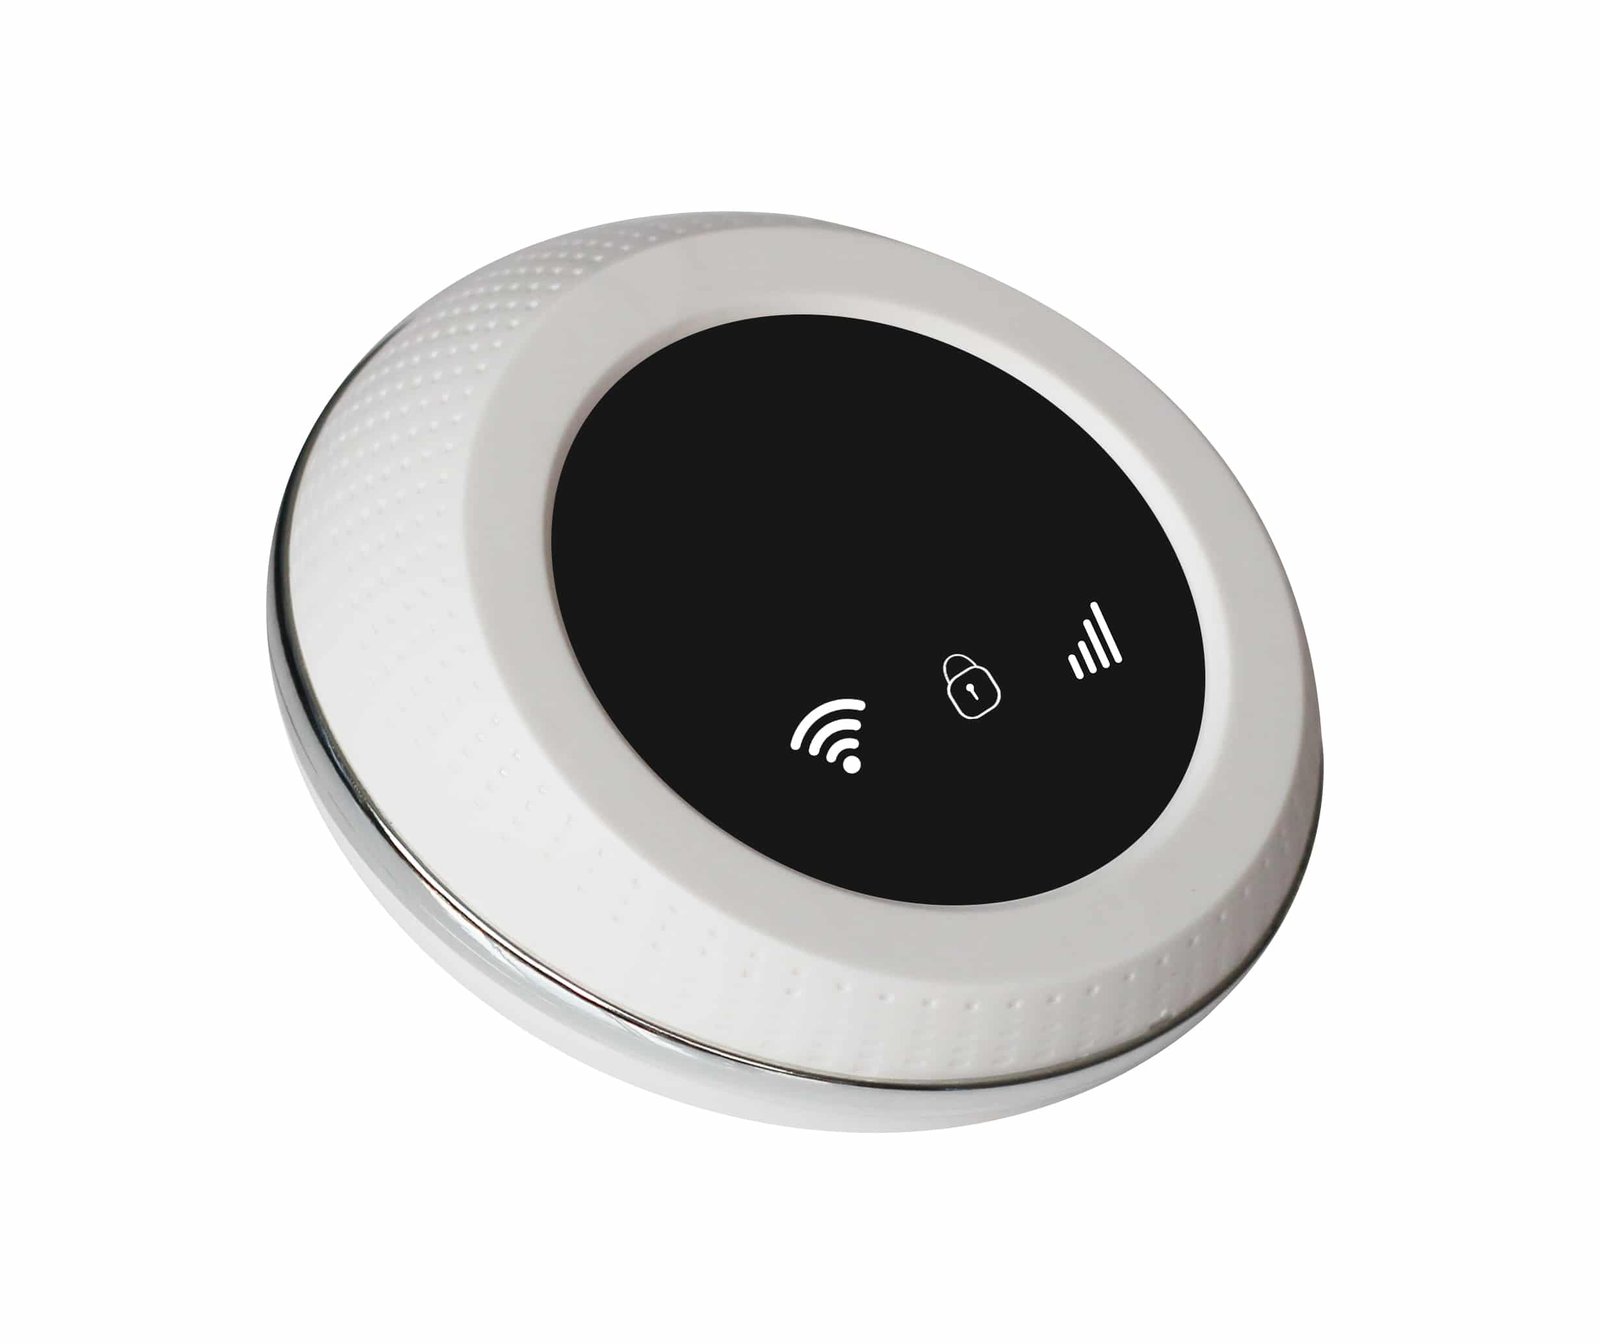 Smart Home Security Alarm system